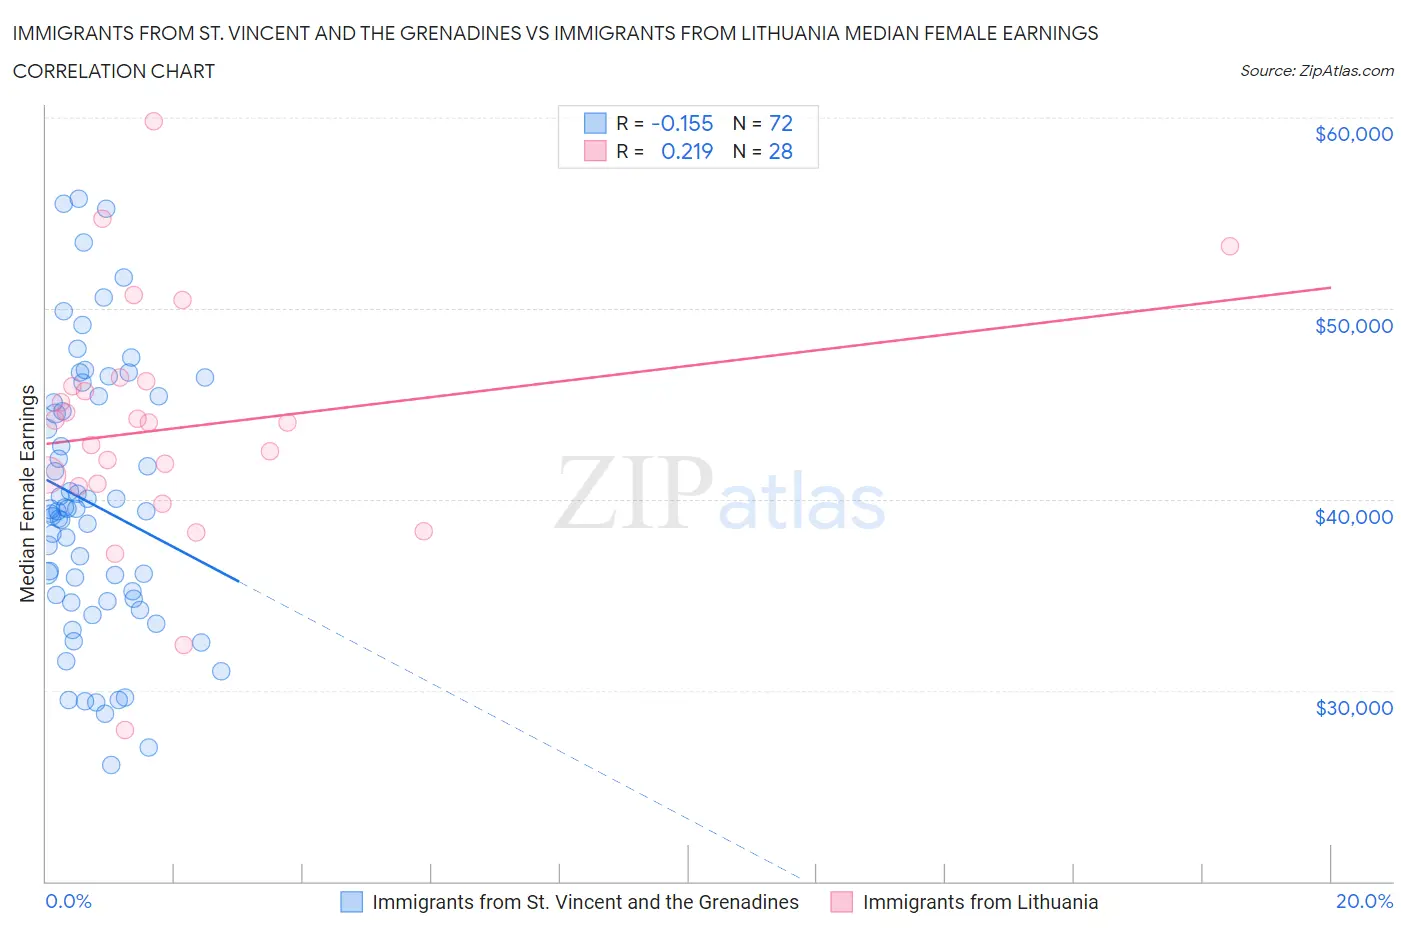 Immigrants from St. Vincent and the Grenadines vs Immigrants from Lithuania Median Female Earnings